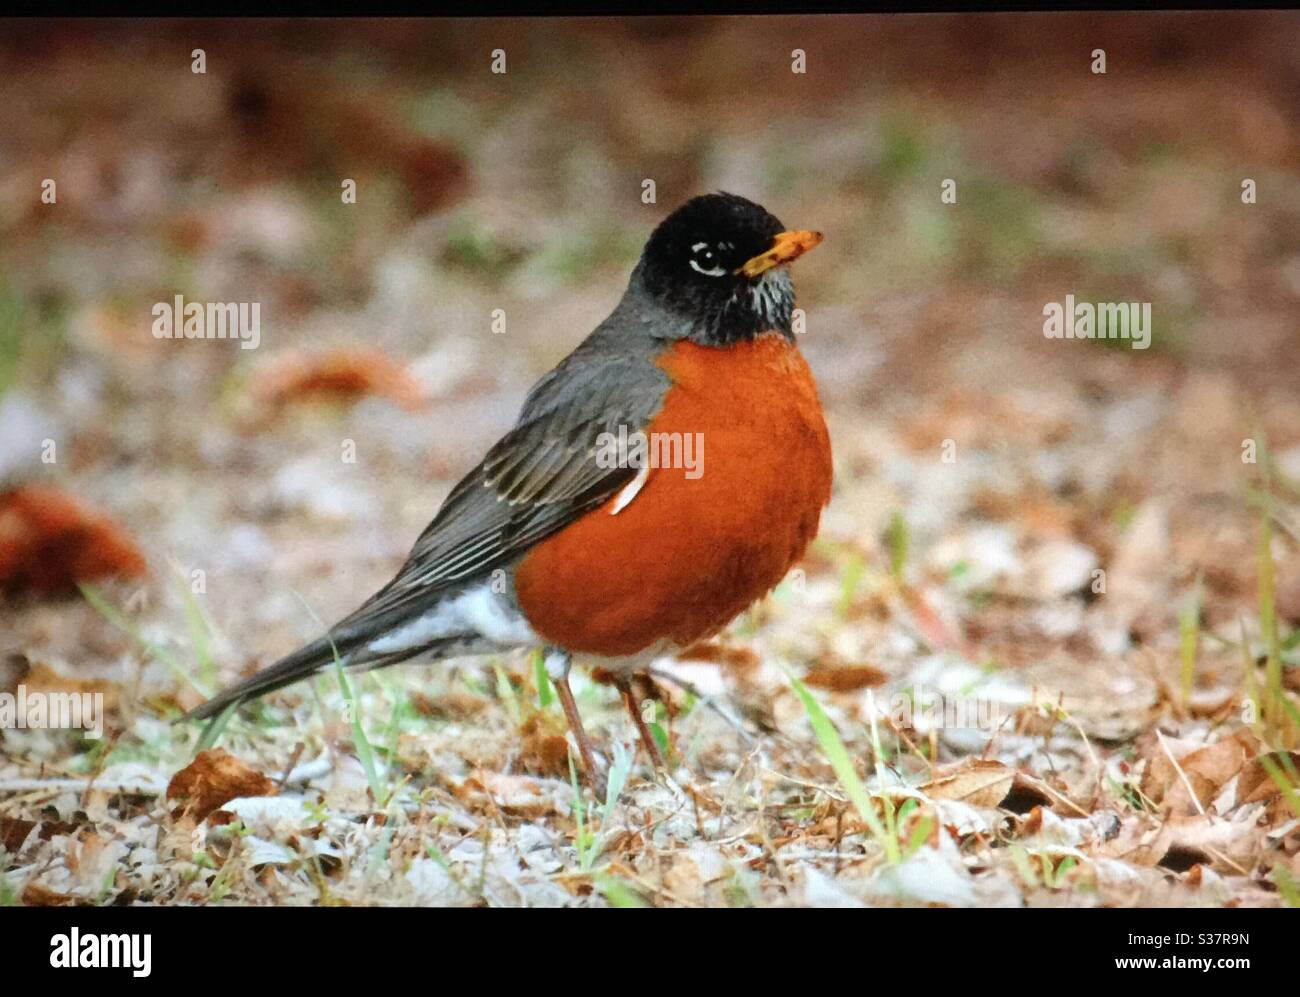 North American Birds, Birds of North America ,American robin. bird, nature, woods, forest, feathers, flight, nature lover Stock Photo